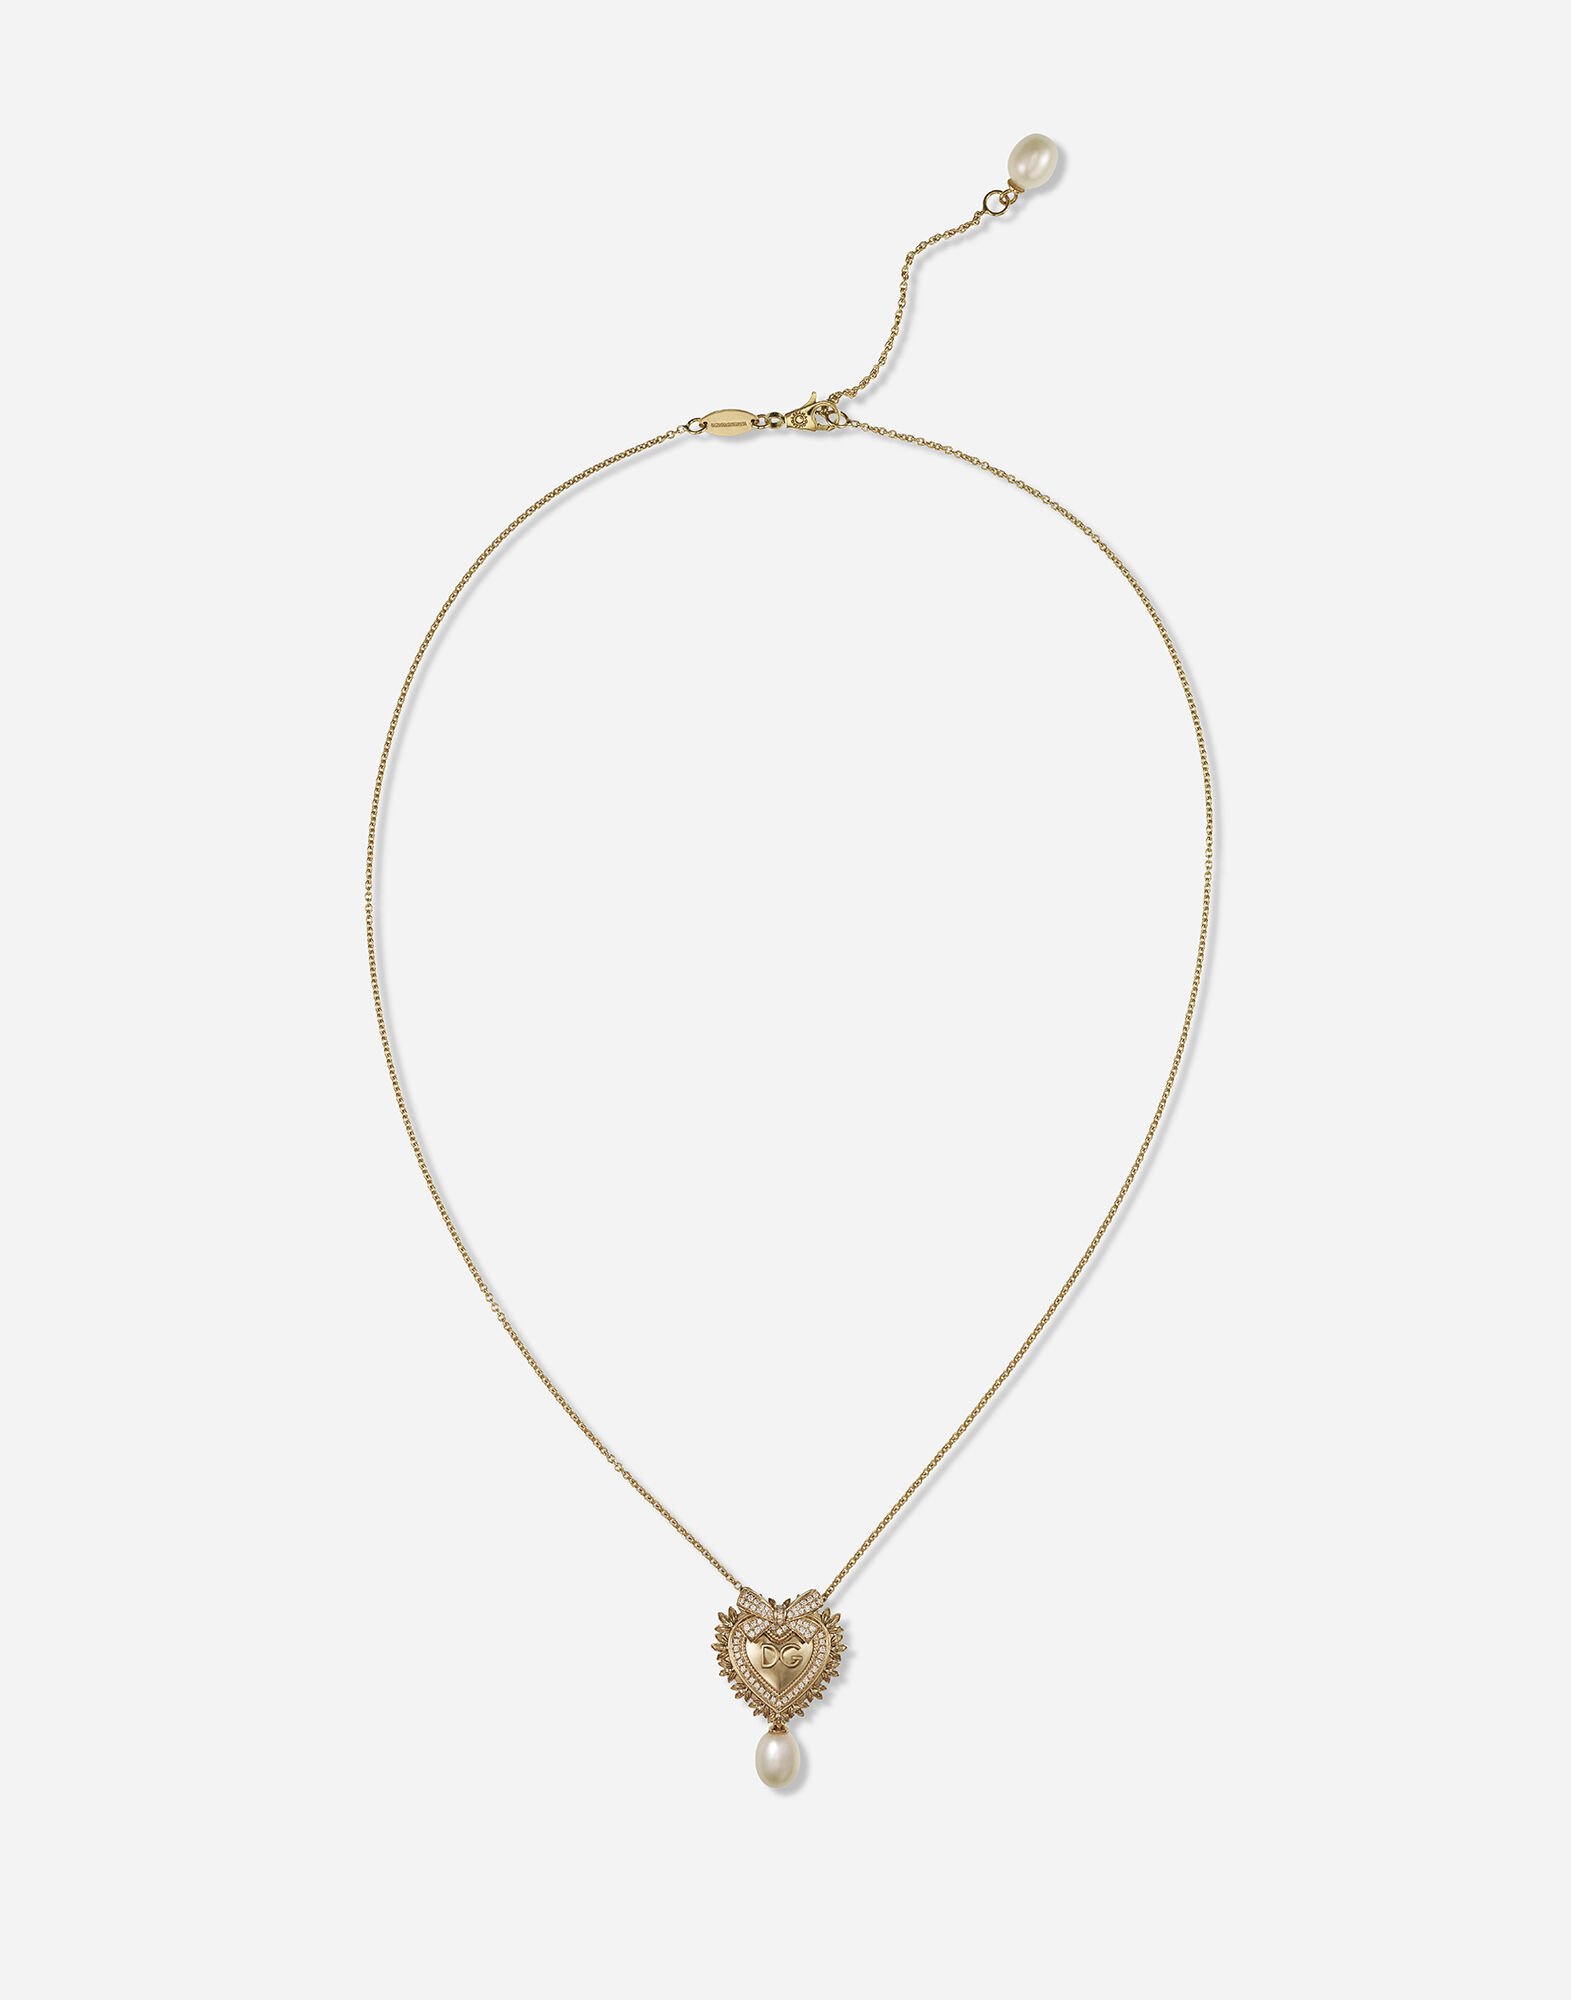 Dolce & Gabbana Devotion necklace in yellow gold with diamonds and pearls Gold BB6711A1016